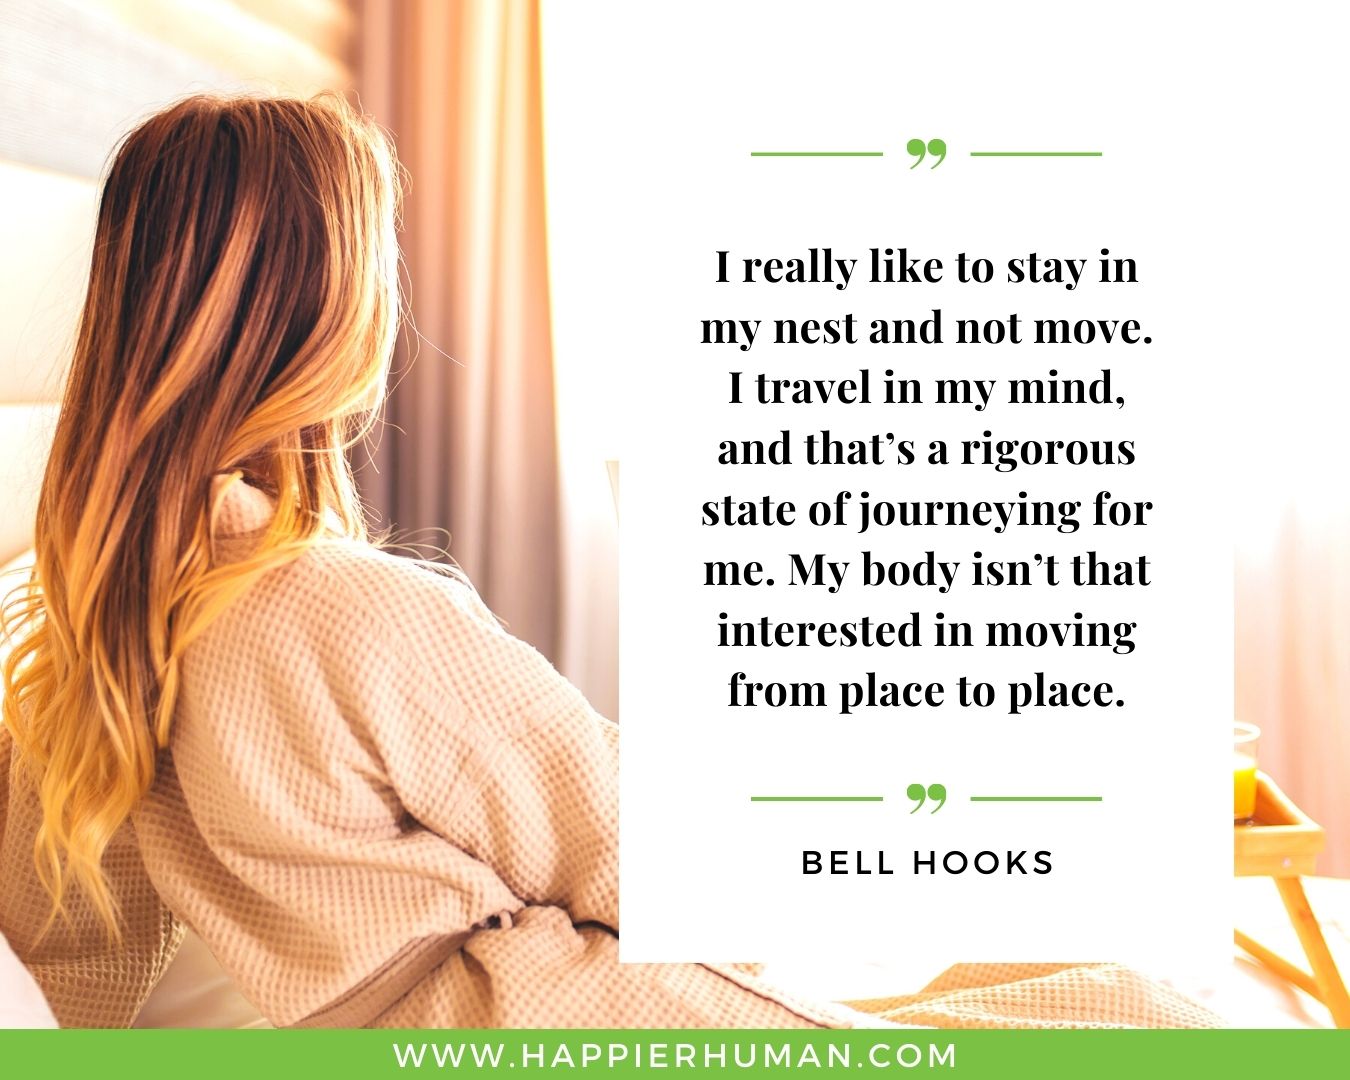 Introvert Quotes - “I really like to stay in my nest and not move. I travel in my mind, and that’s a rigorous state of journeying for me. My body isn’t that interested in moving from place to place.” – Bell Hooks